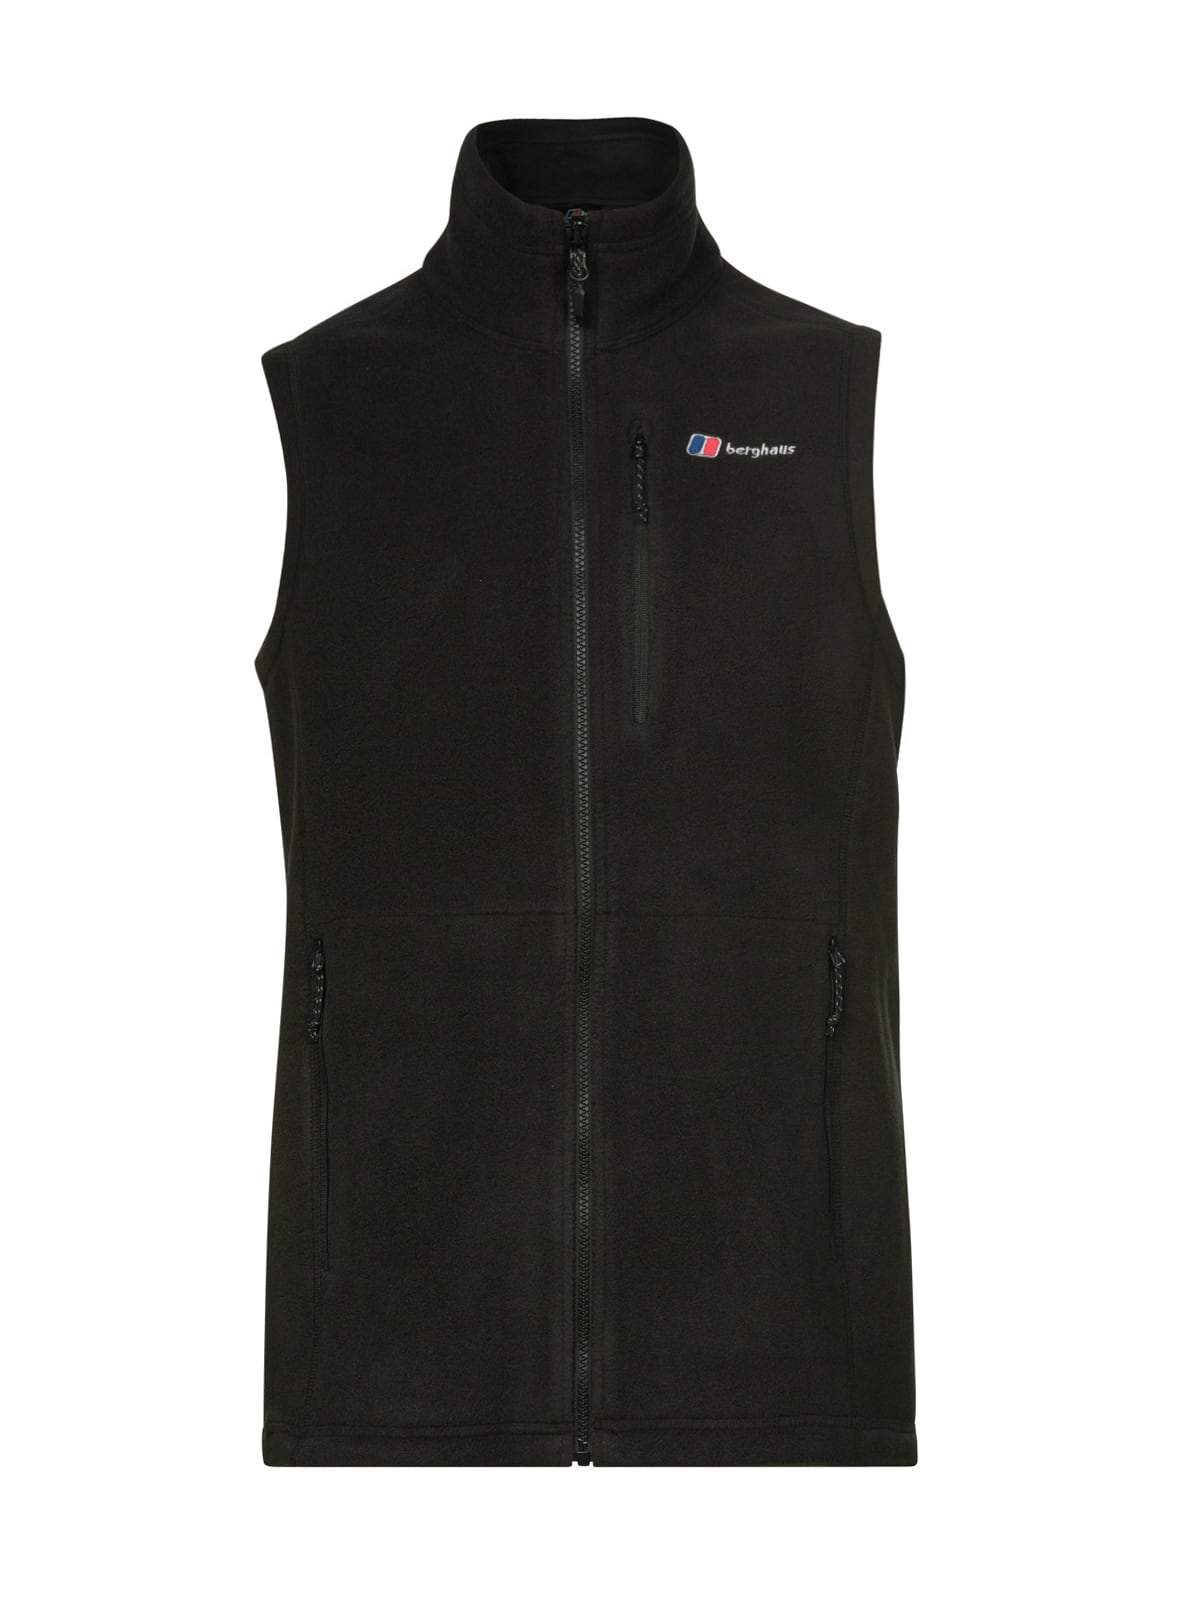 Men’s Prism PTA IA FL Vest by Berghaus - Promotions Only Group Limited